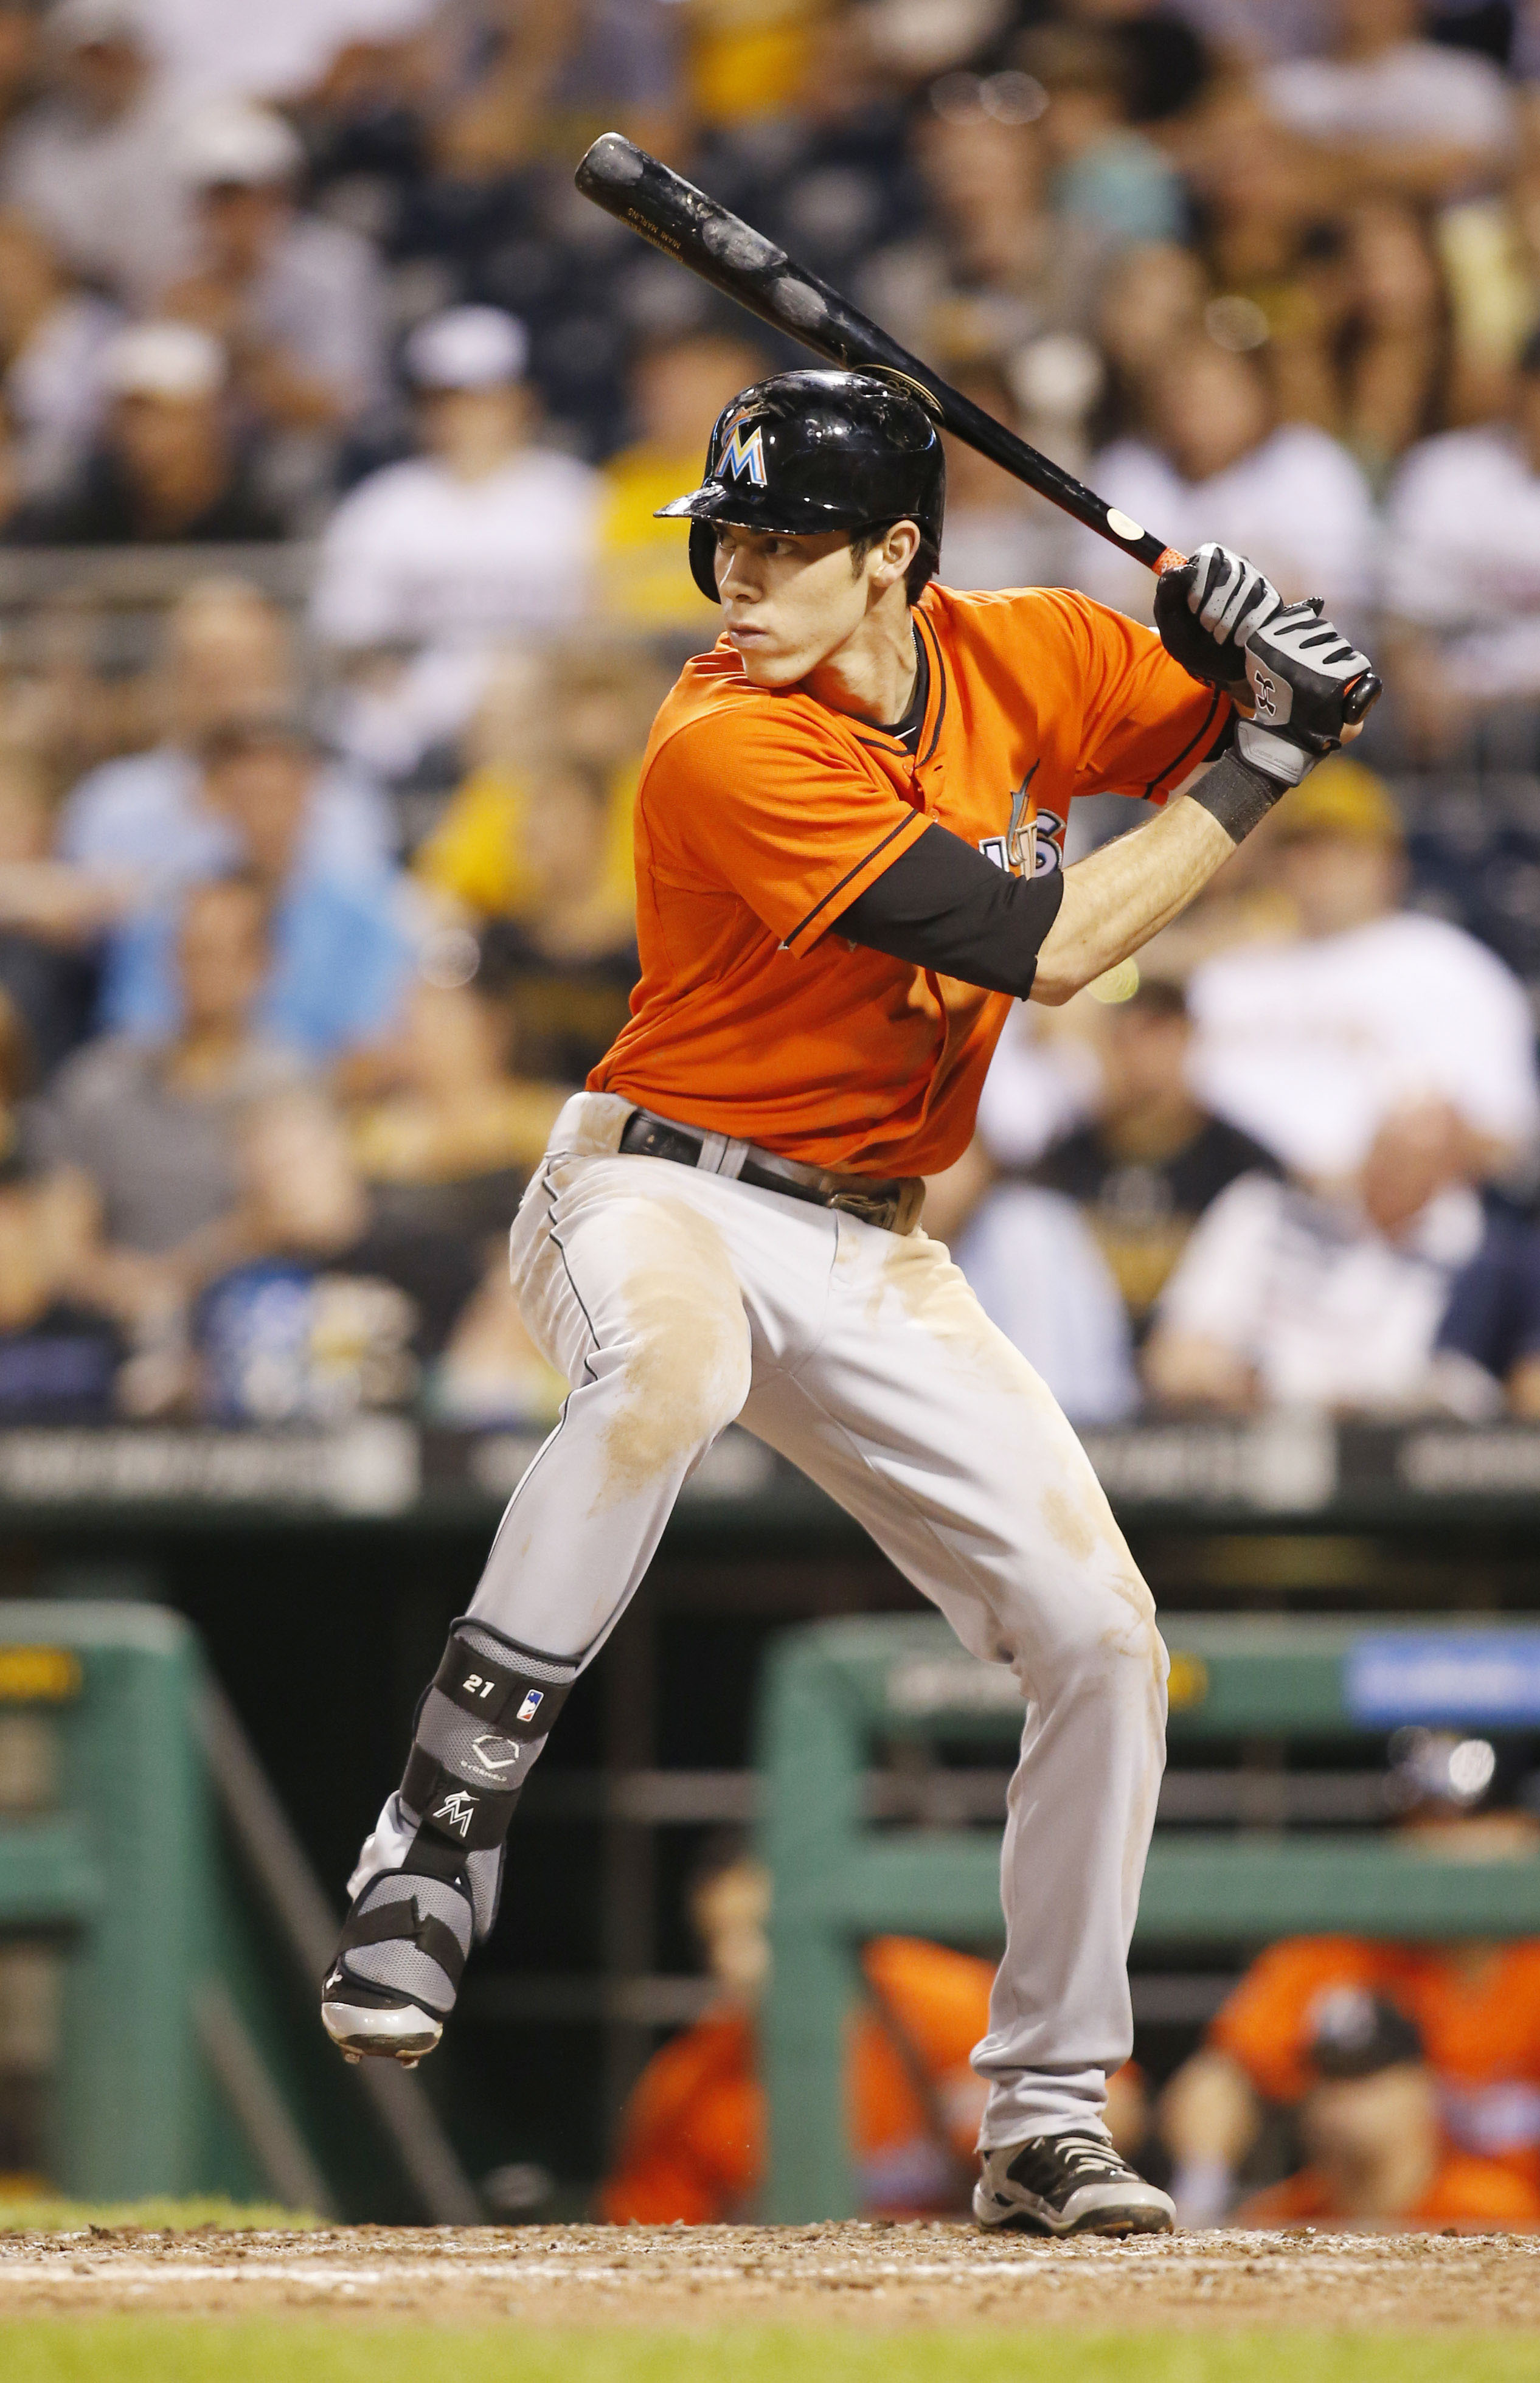 Marlins sign OF Yelich to seven-year extension